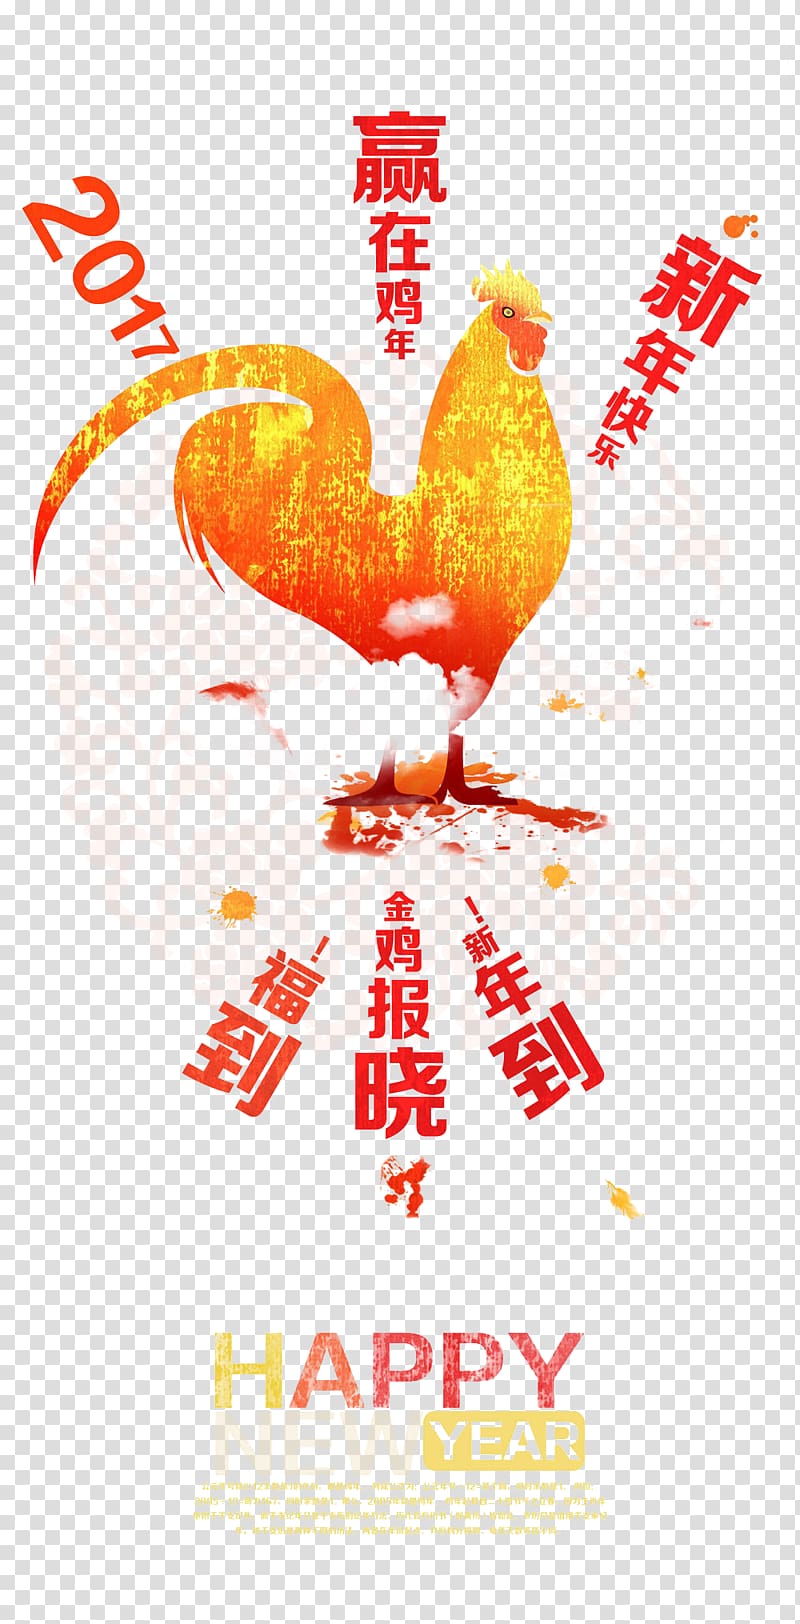 Chicken Chinese New Year Poster, Year of the Rooster Chinese New Year Poster transparent background PNG clipart